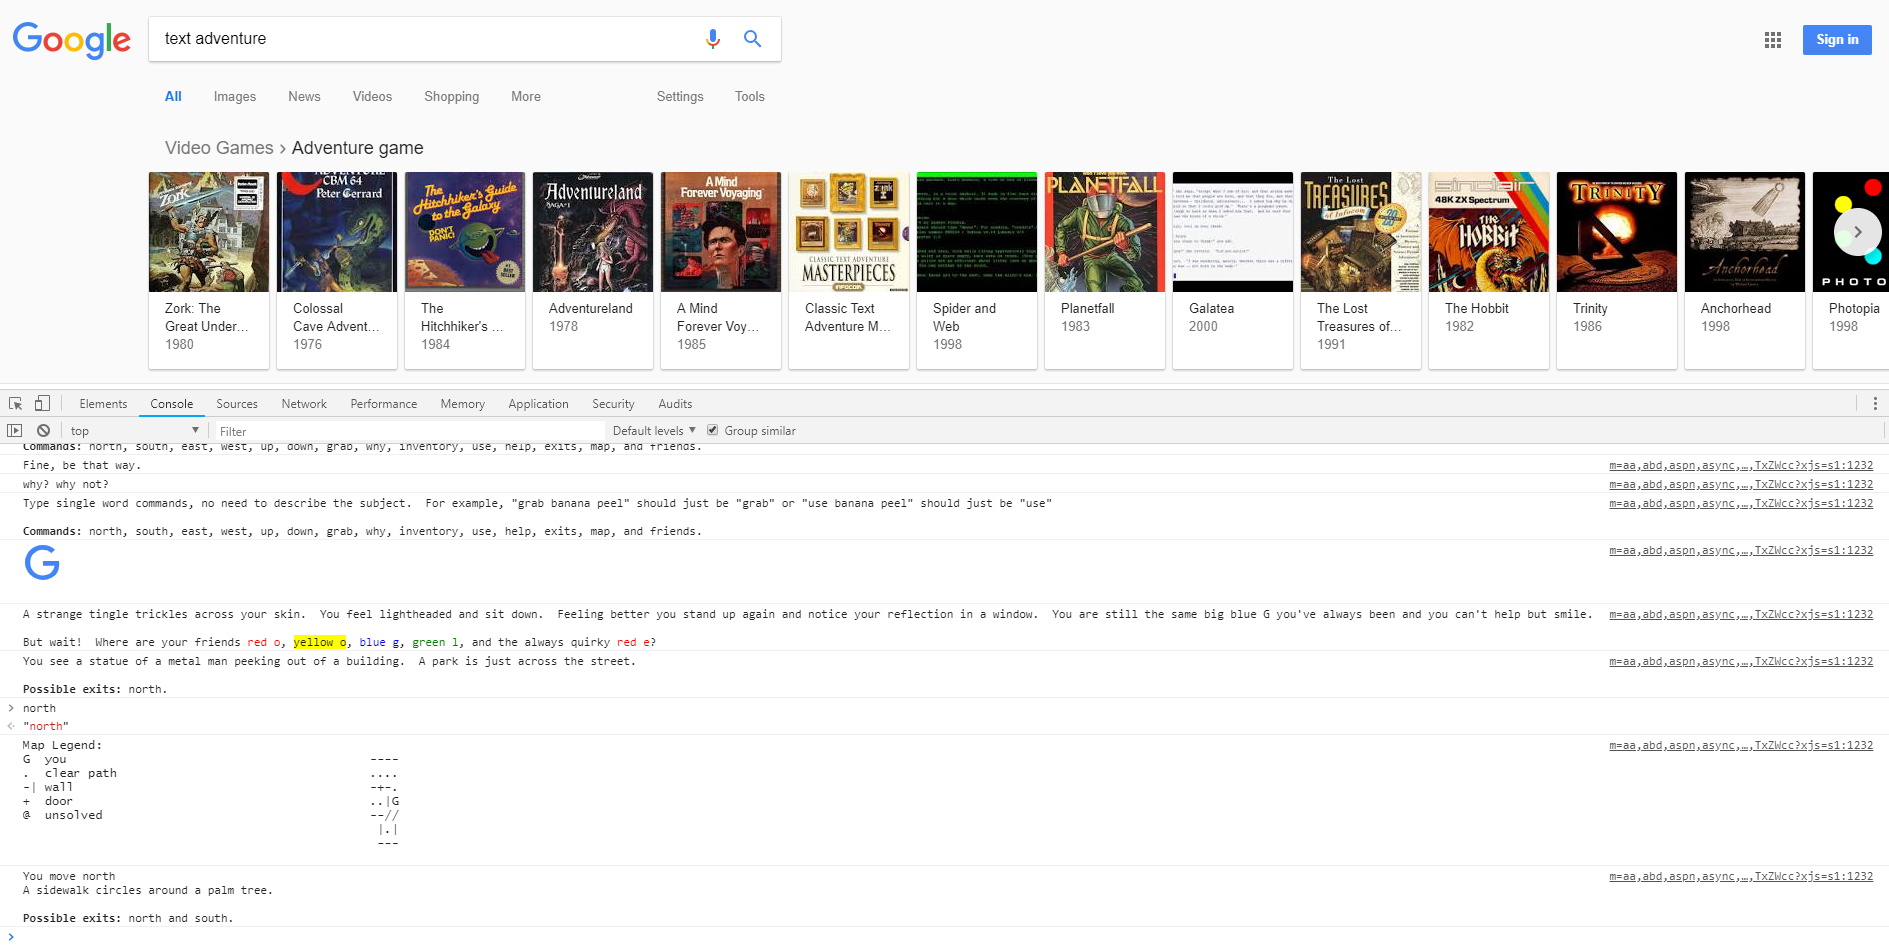 Image for Recently discovered Google easter egg is a browser-based text adventure game